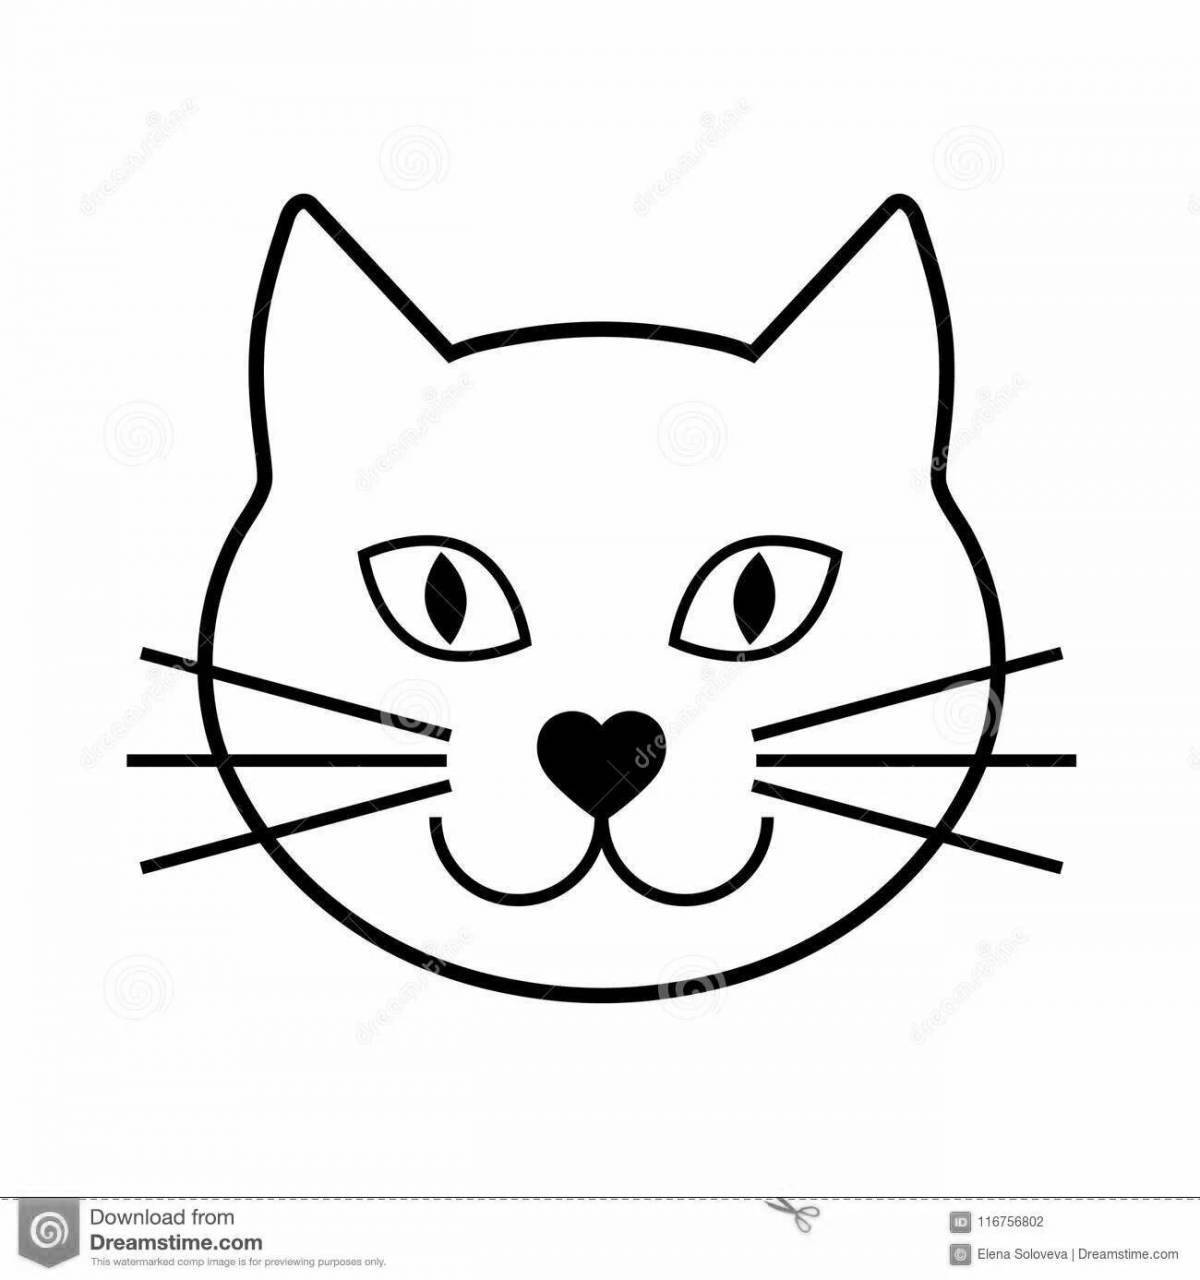 Glowing cat face coloring page